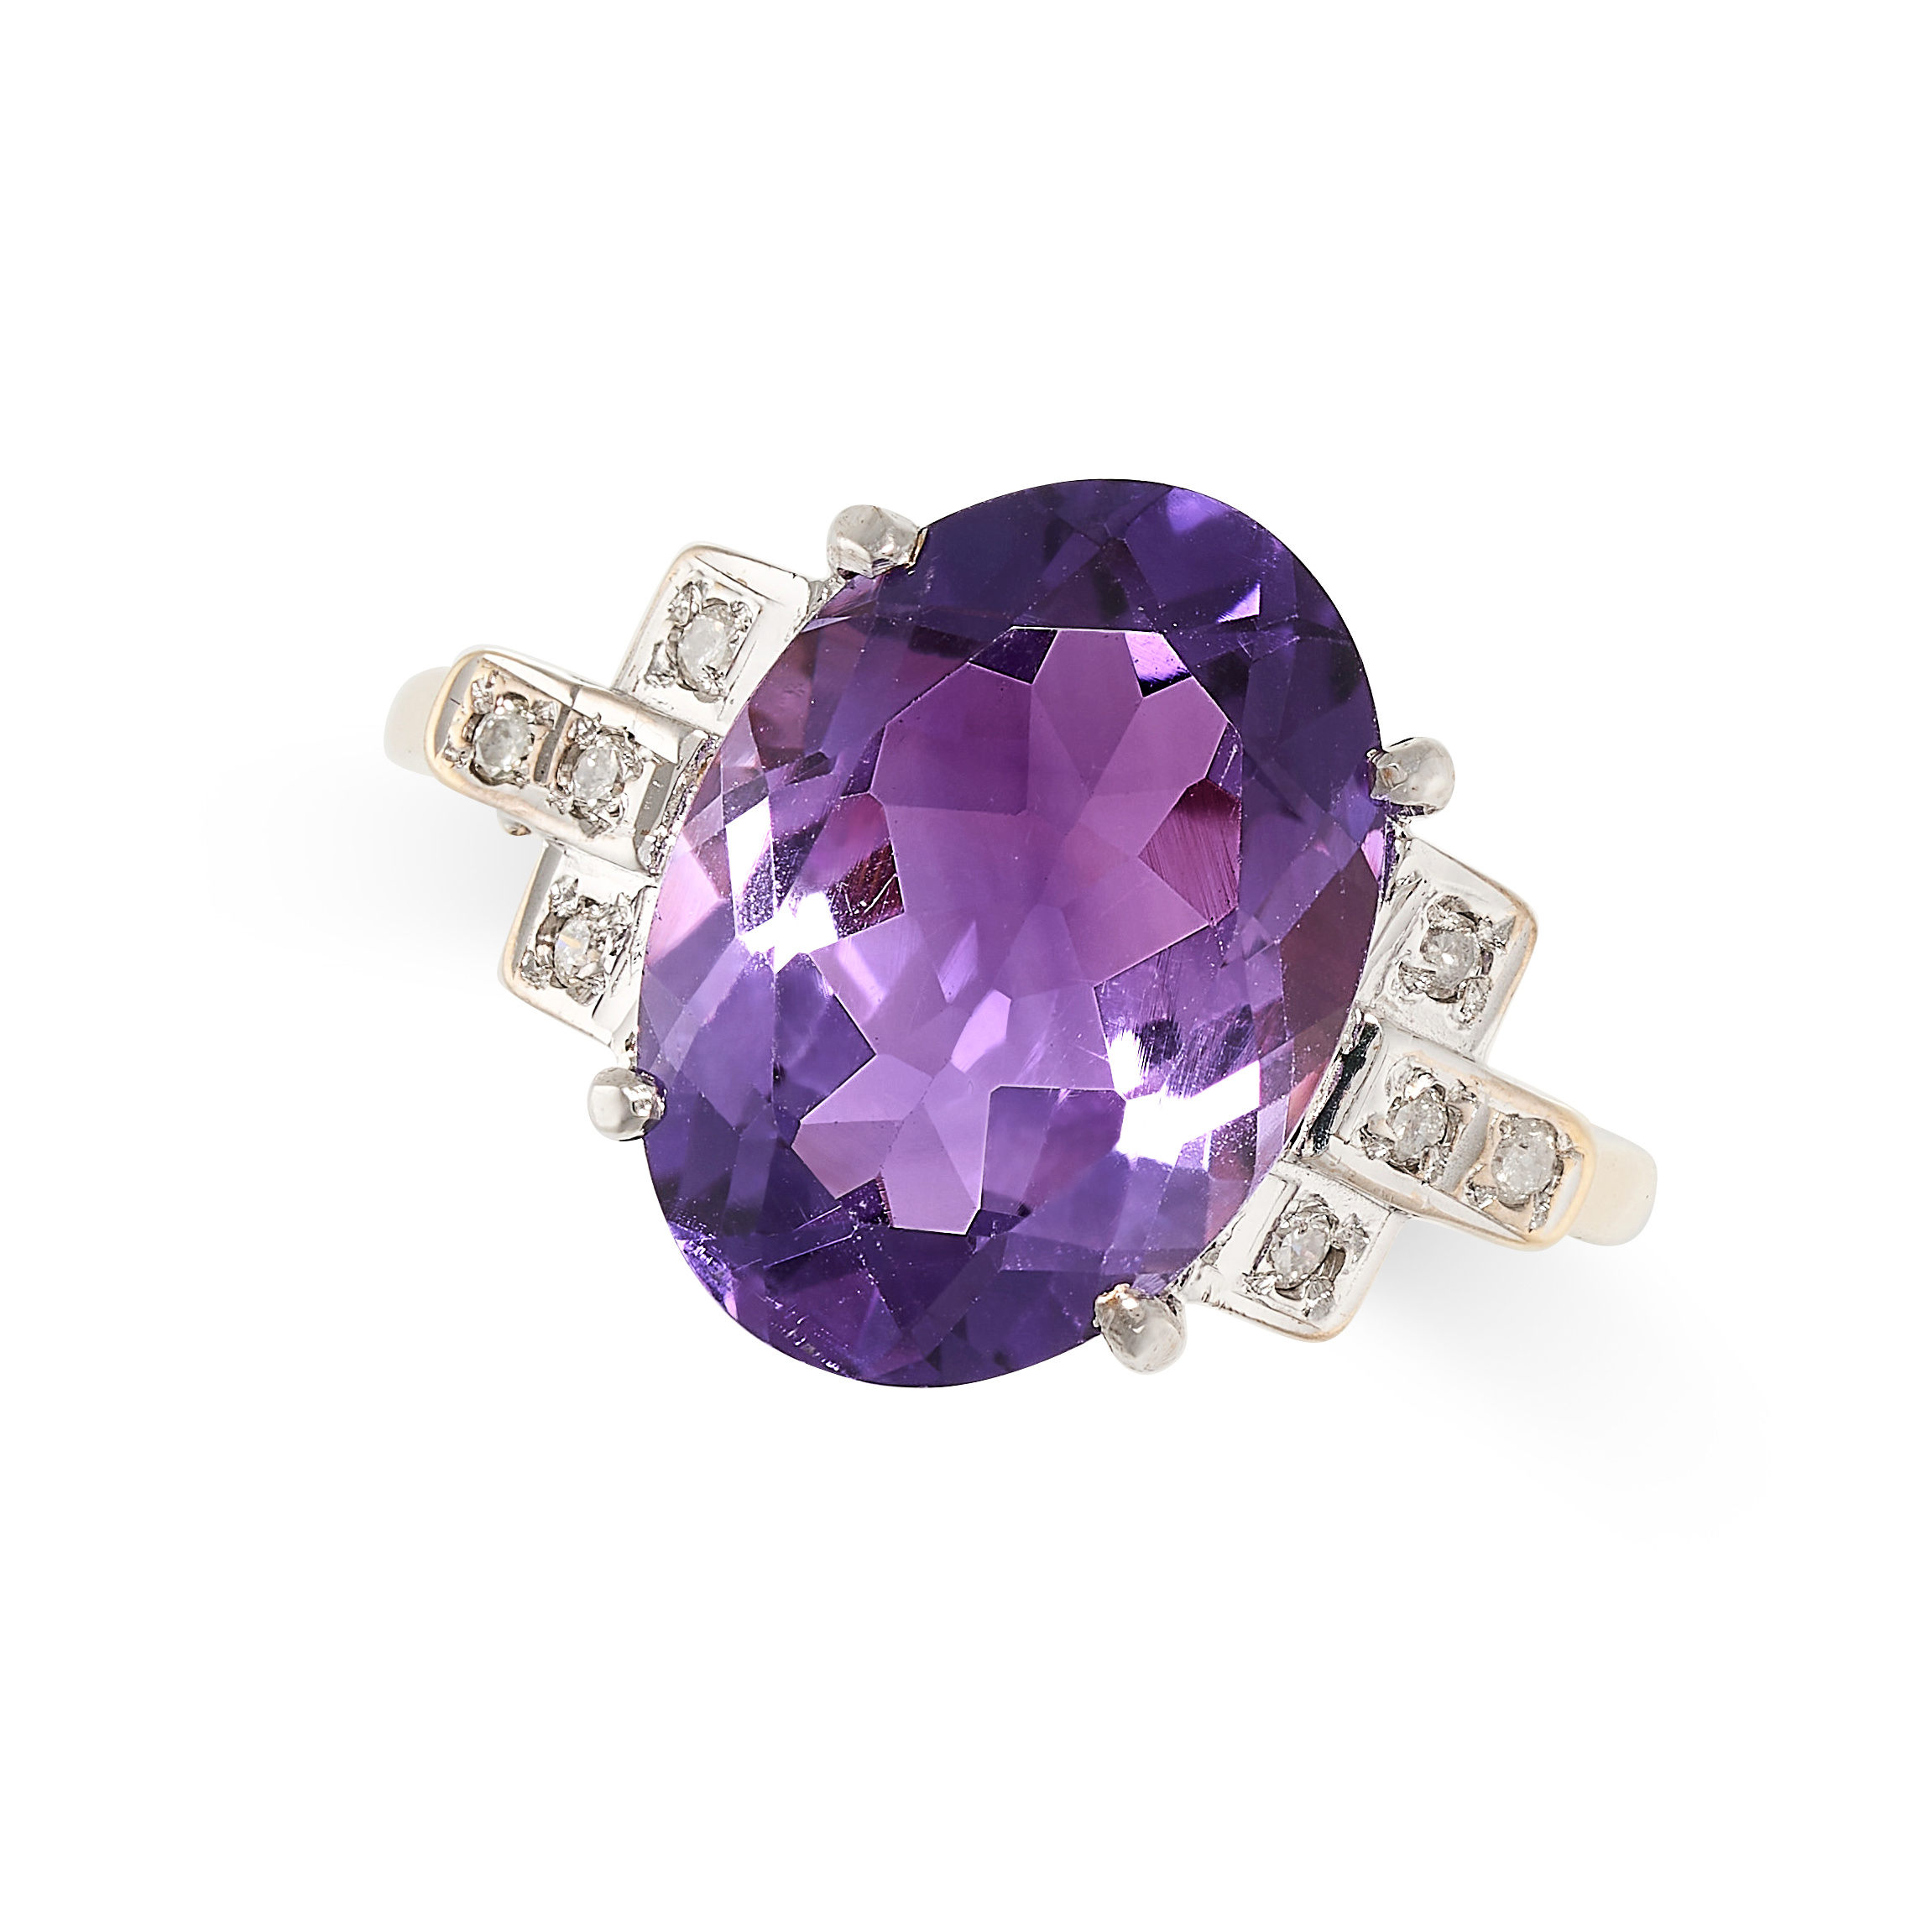 AN AMETHYST AND DIAMOND RING in yellow gold, set with an oval cut amethyst accented by round cut